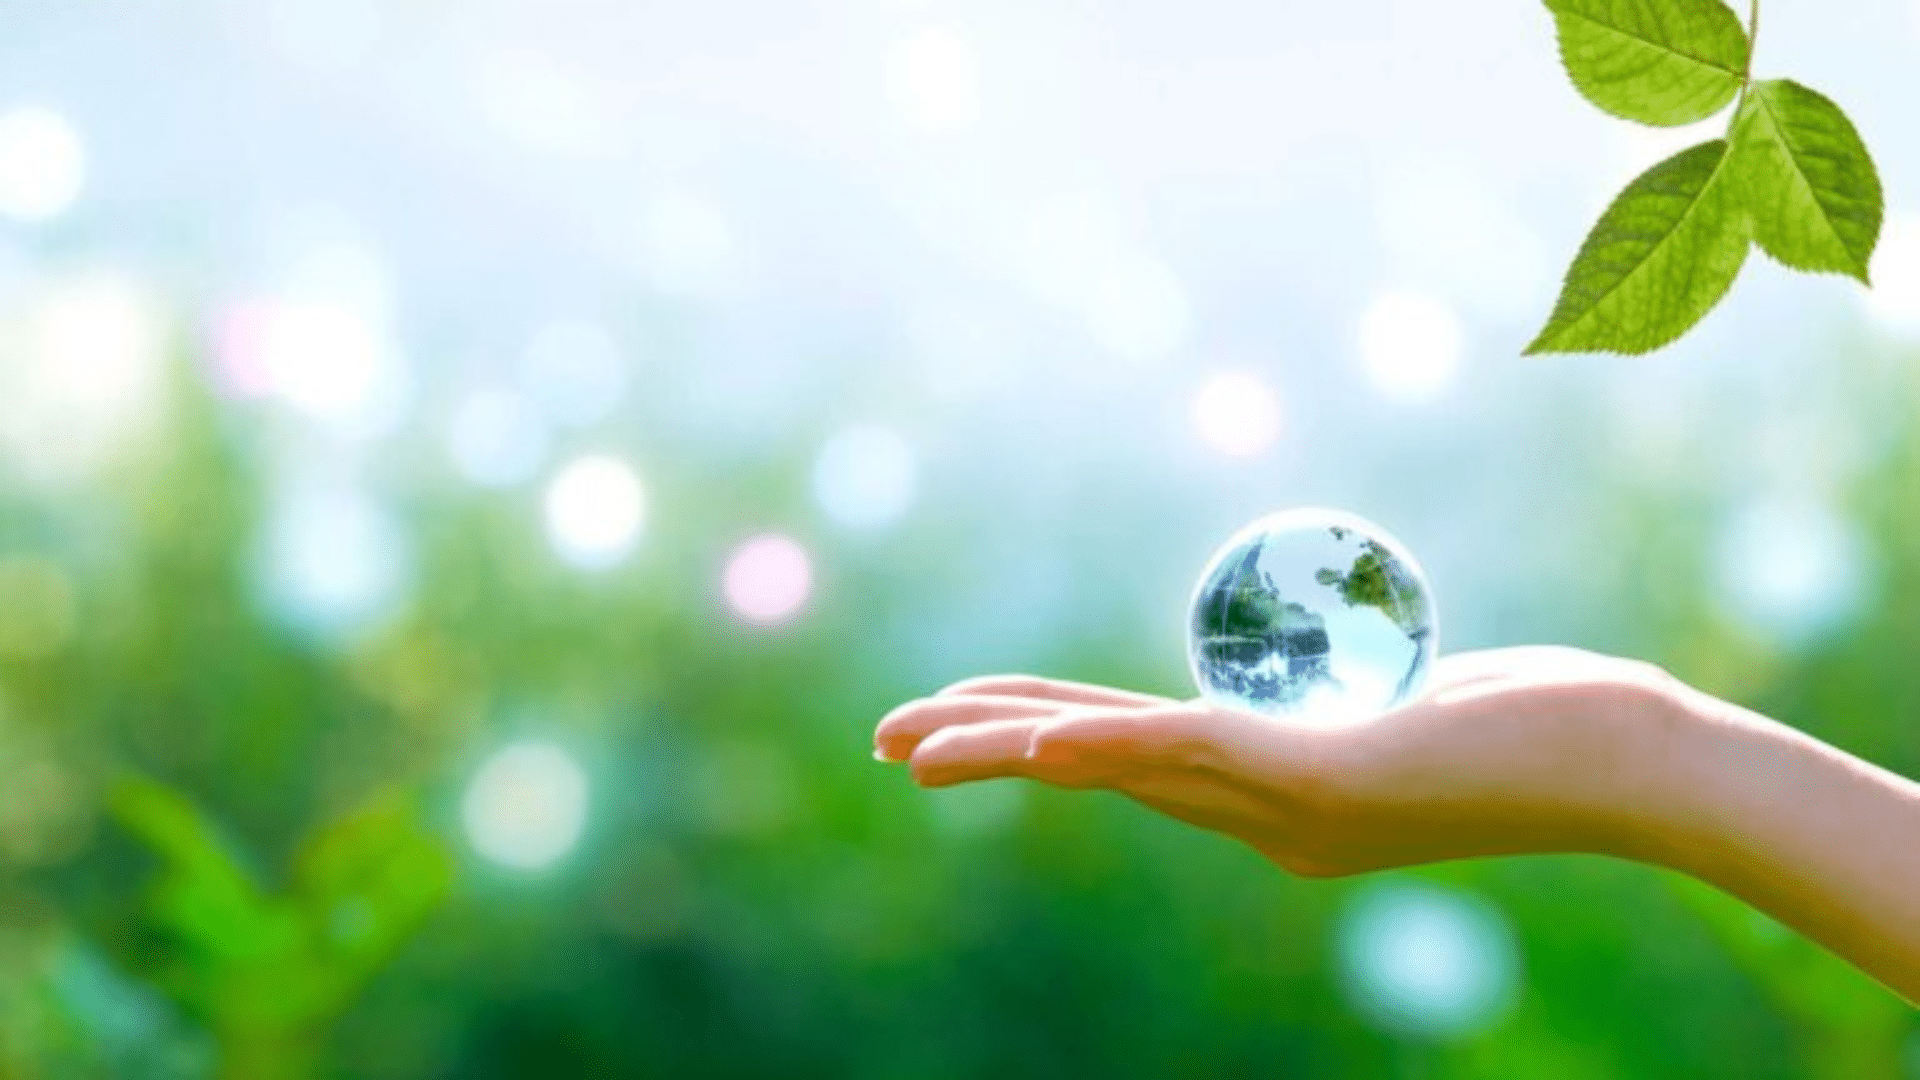 On a verdant nature setting, a woman delicately embraces the transparent globe of Earth in her hand